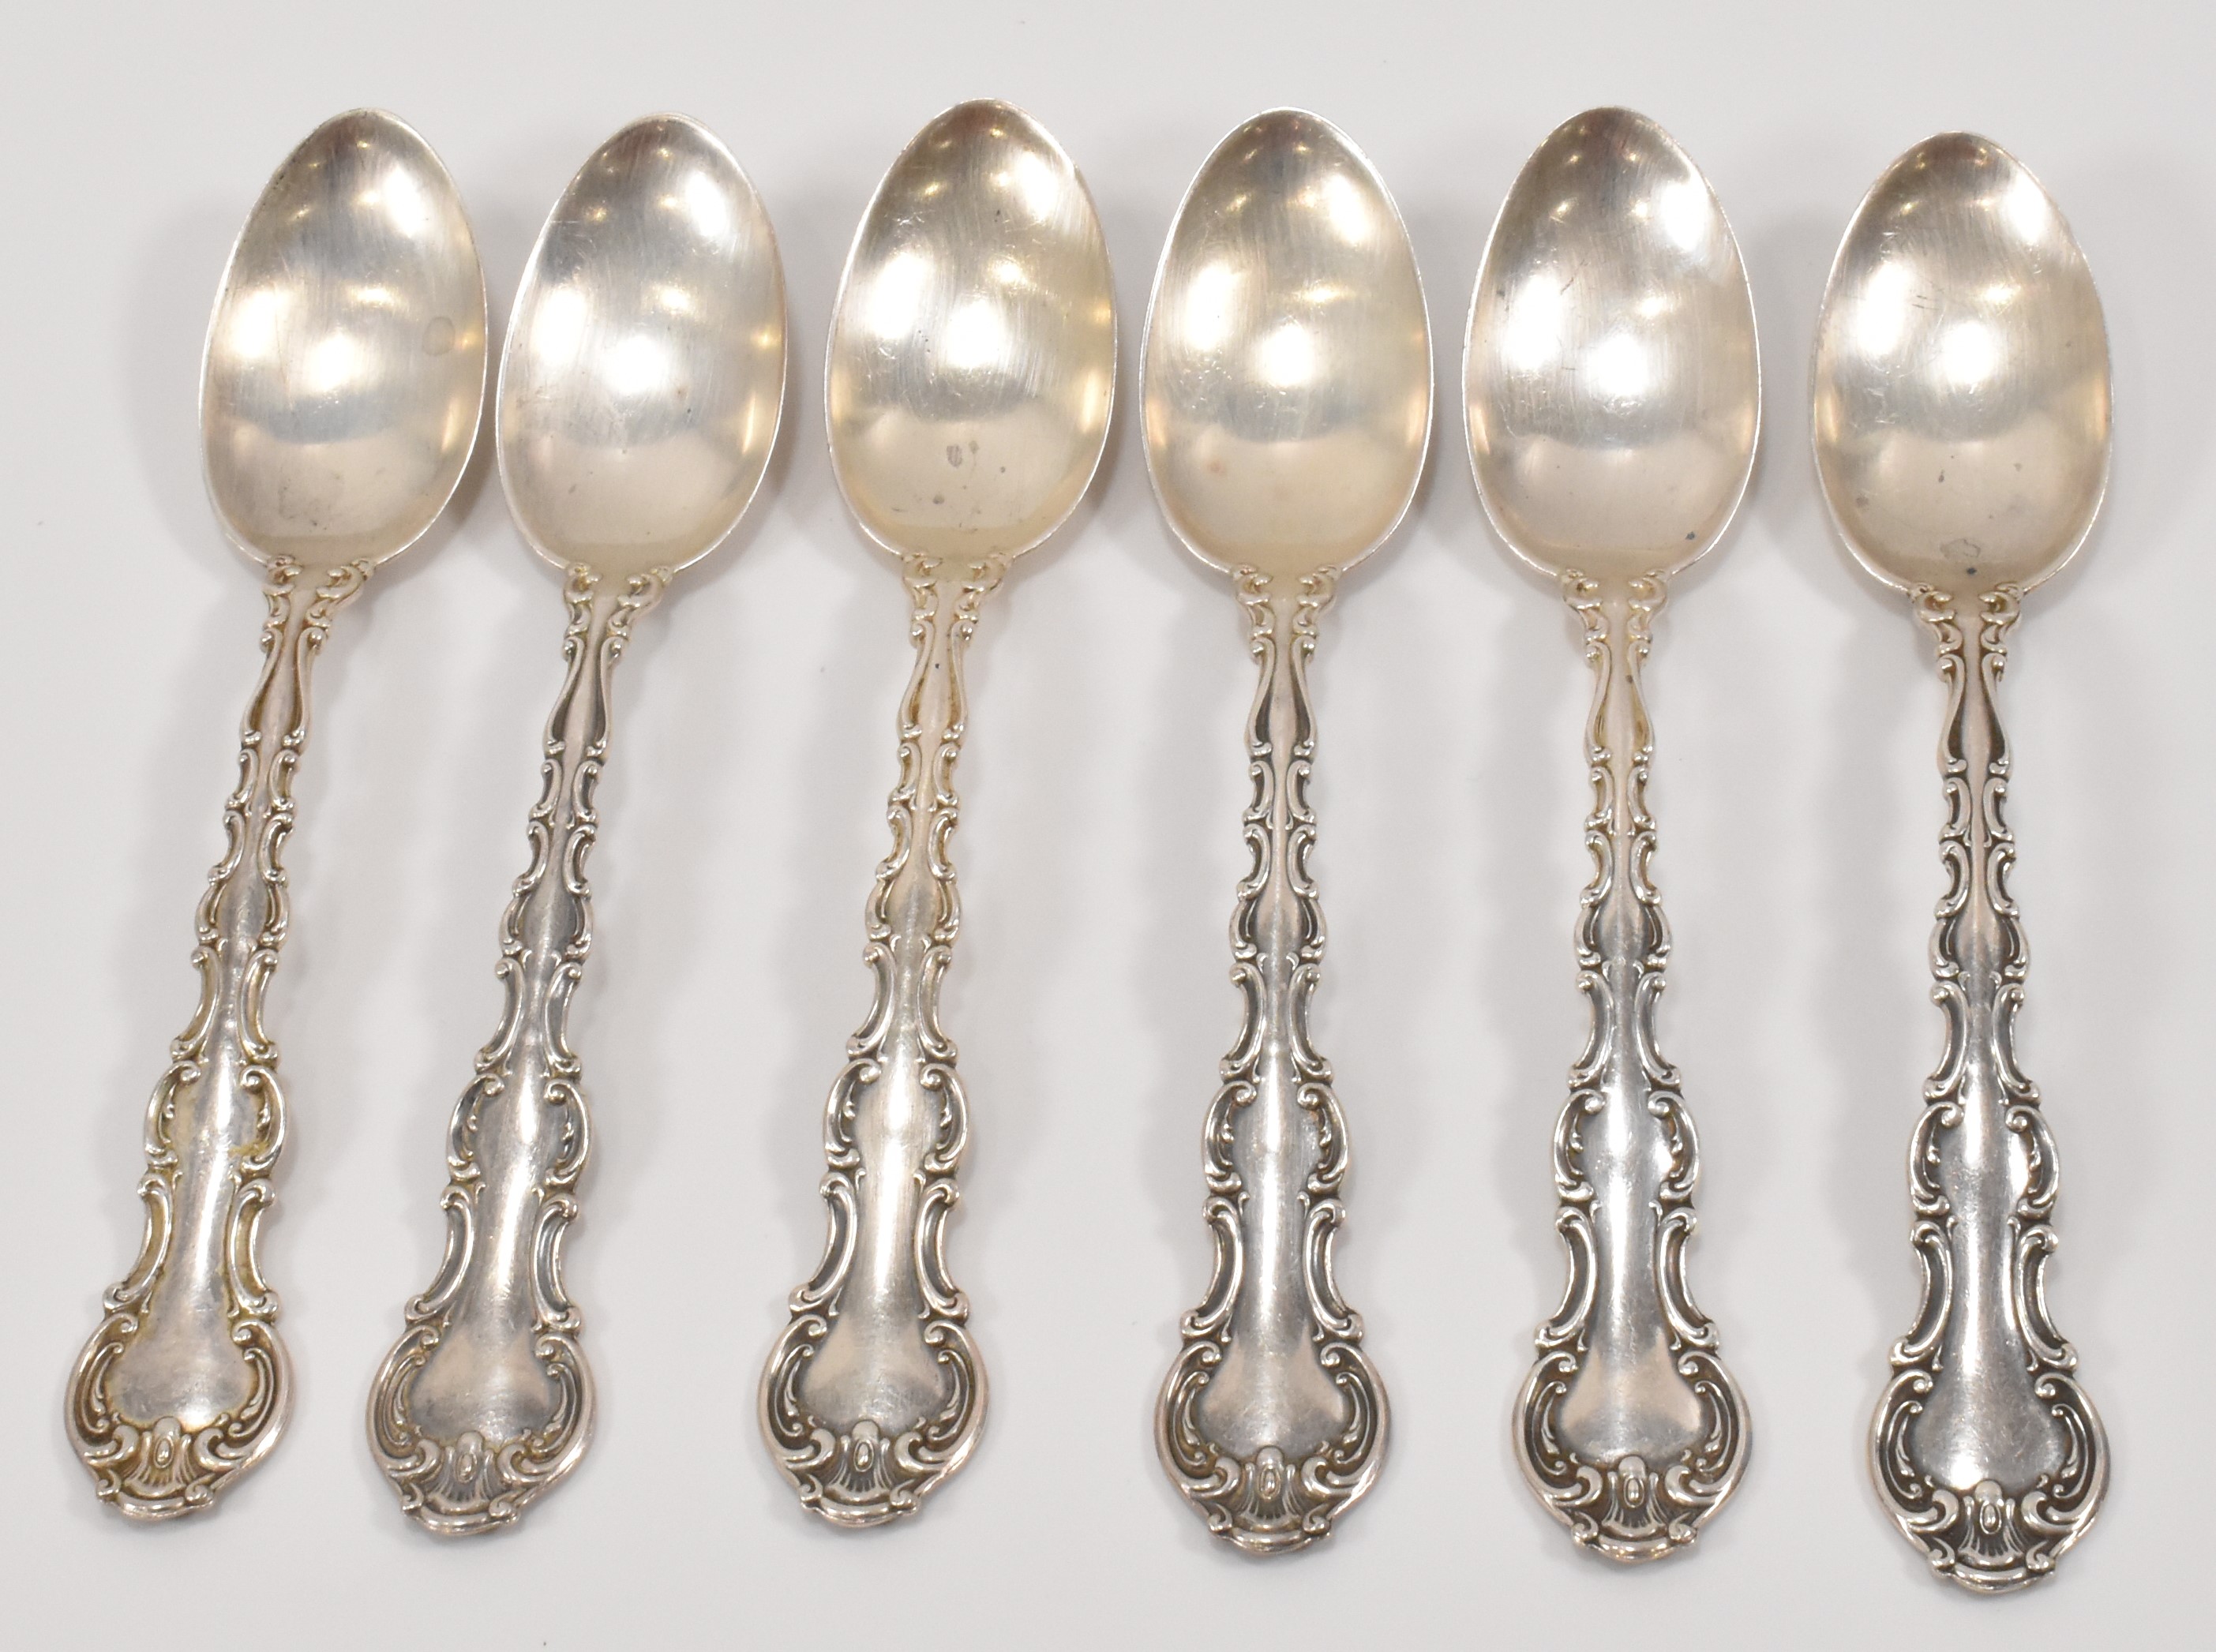 SET OF SIX GORHAM MANUFACTURING CO SILVER SPOONS - Image 2 of 4